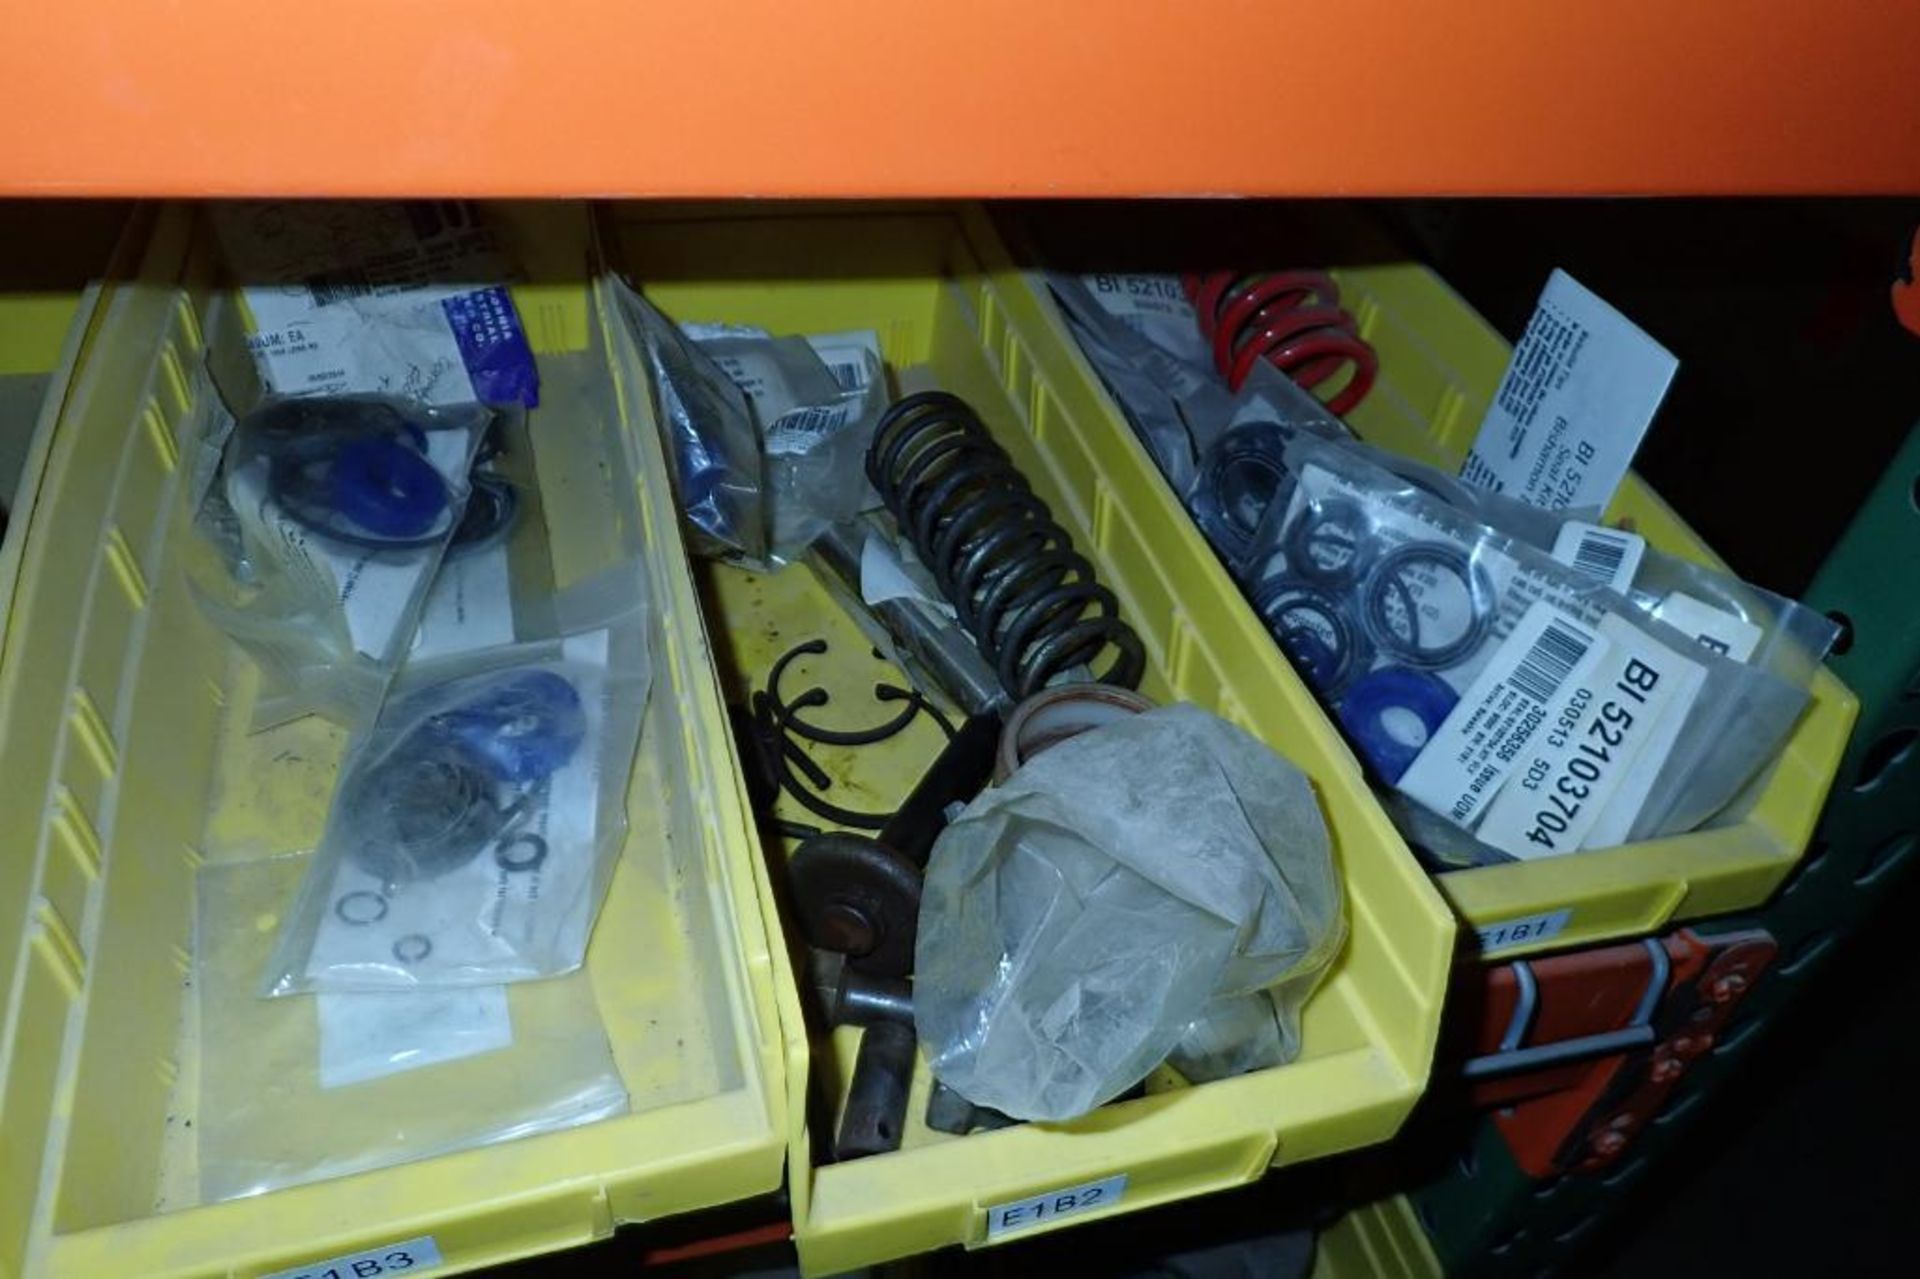 Contents of 6 shelves of assorted parts, Fortress vertex scale readout, controllers, drive belts, di - Image 43 of 69